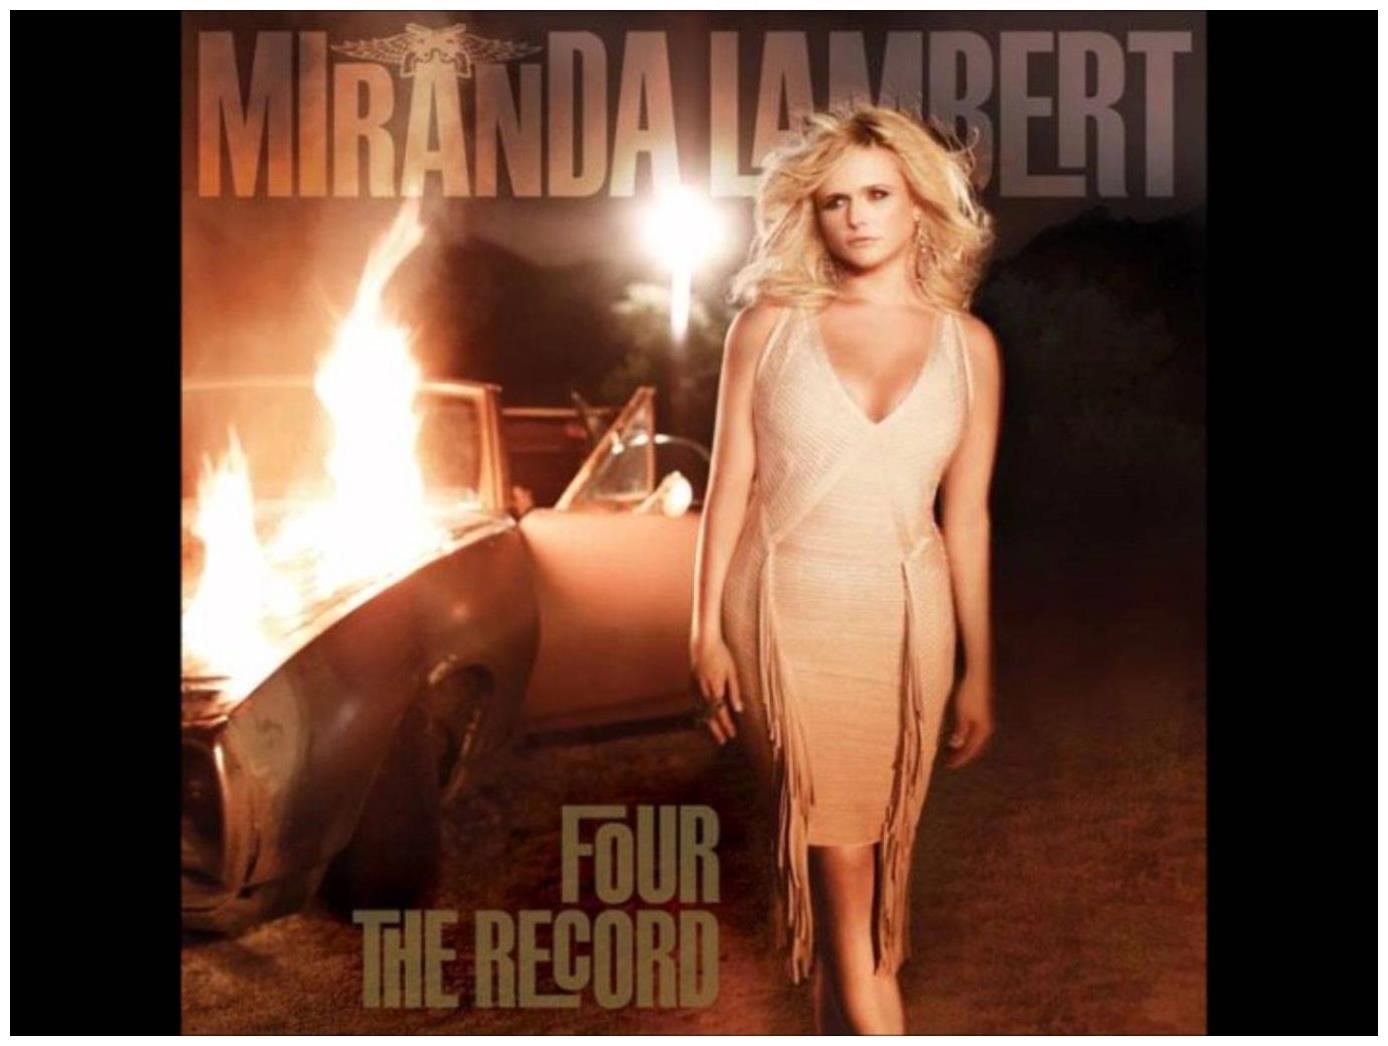 20 I Cut My Hair With Rusty Kitchen Scissors Miranda Lambert I,Cut,My,Hair,Rusty,Kitchen,Scissors